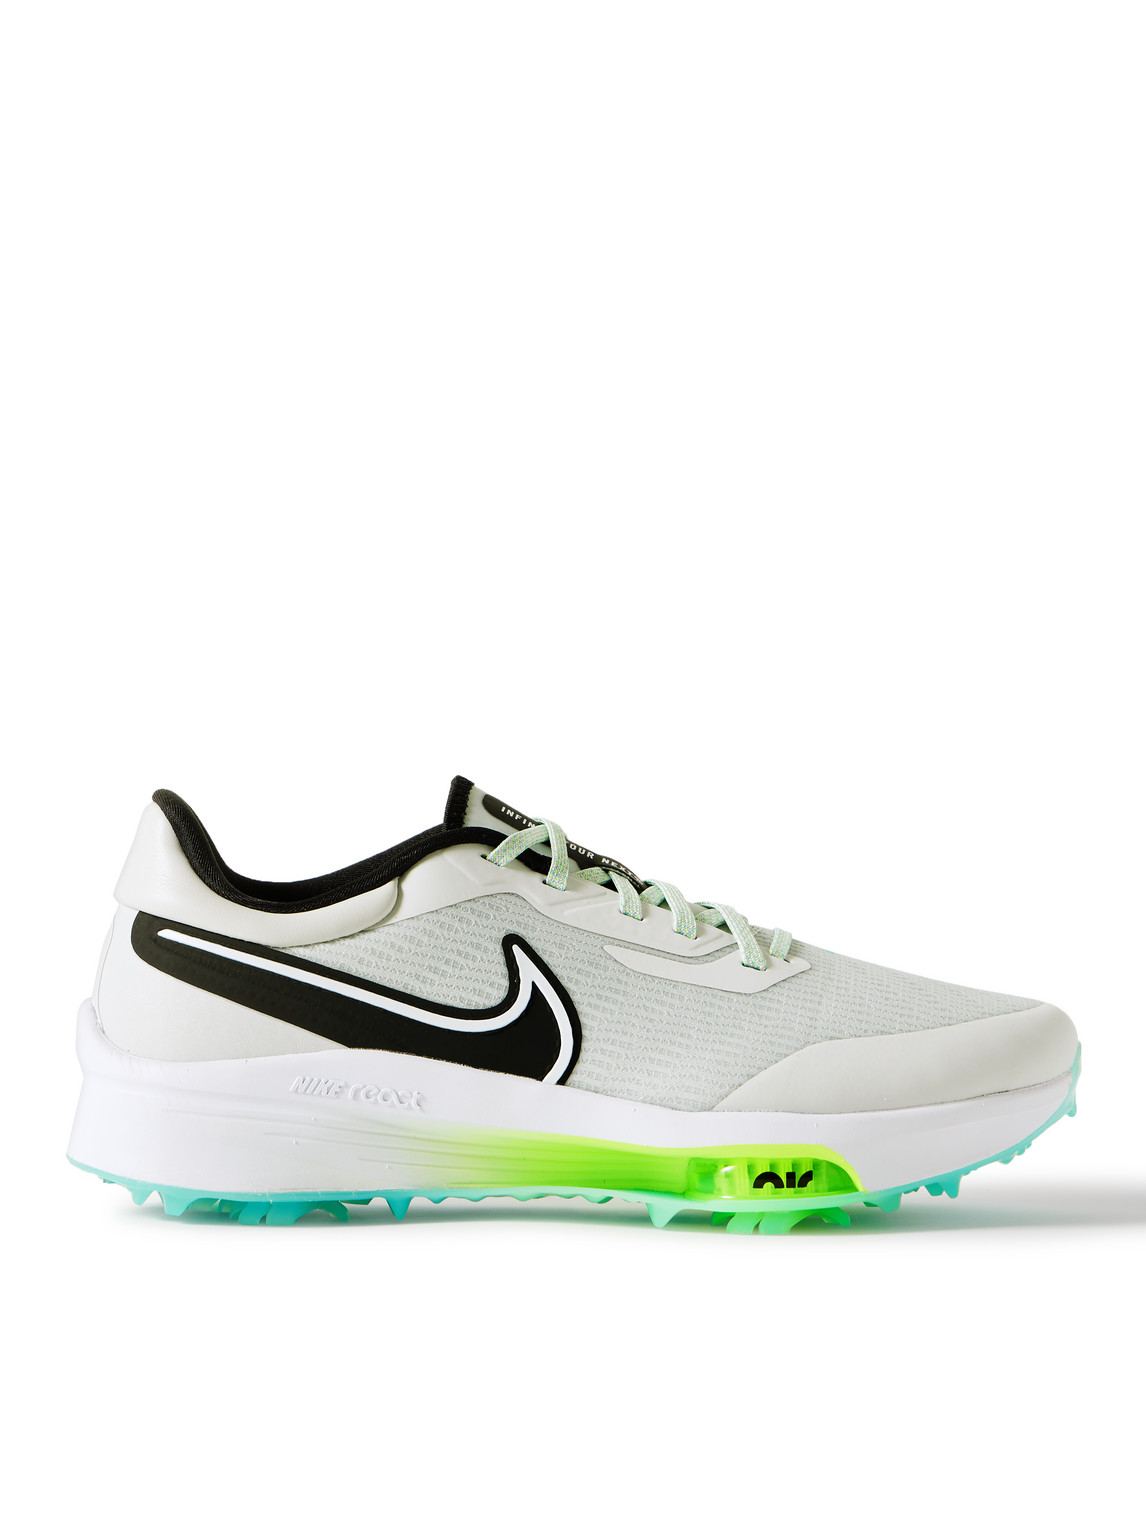 Air Zoom Infinity Tour Rubber-Trimmed Flyknit Golf Shoes